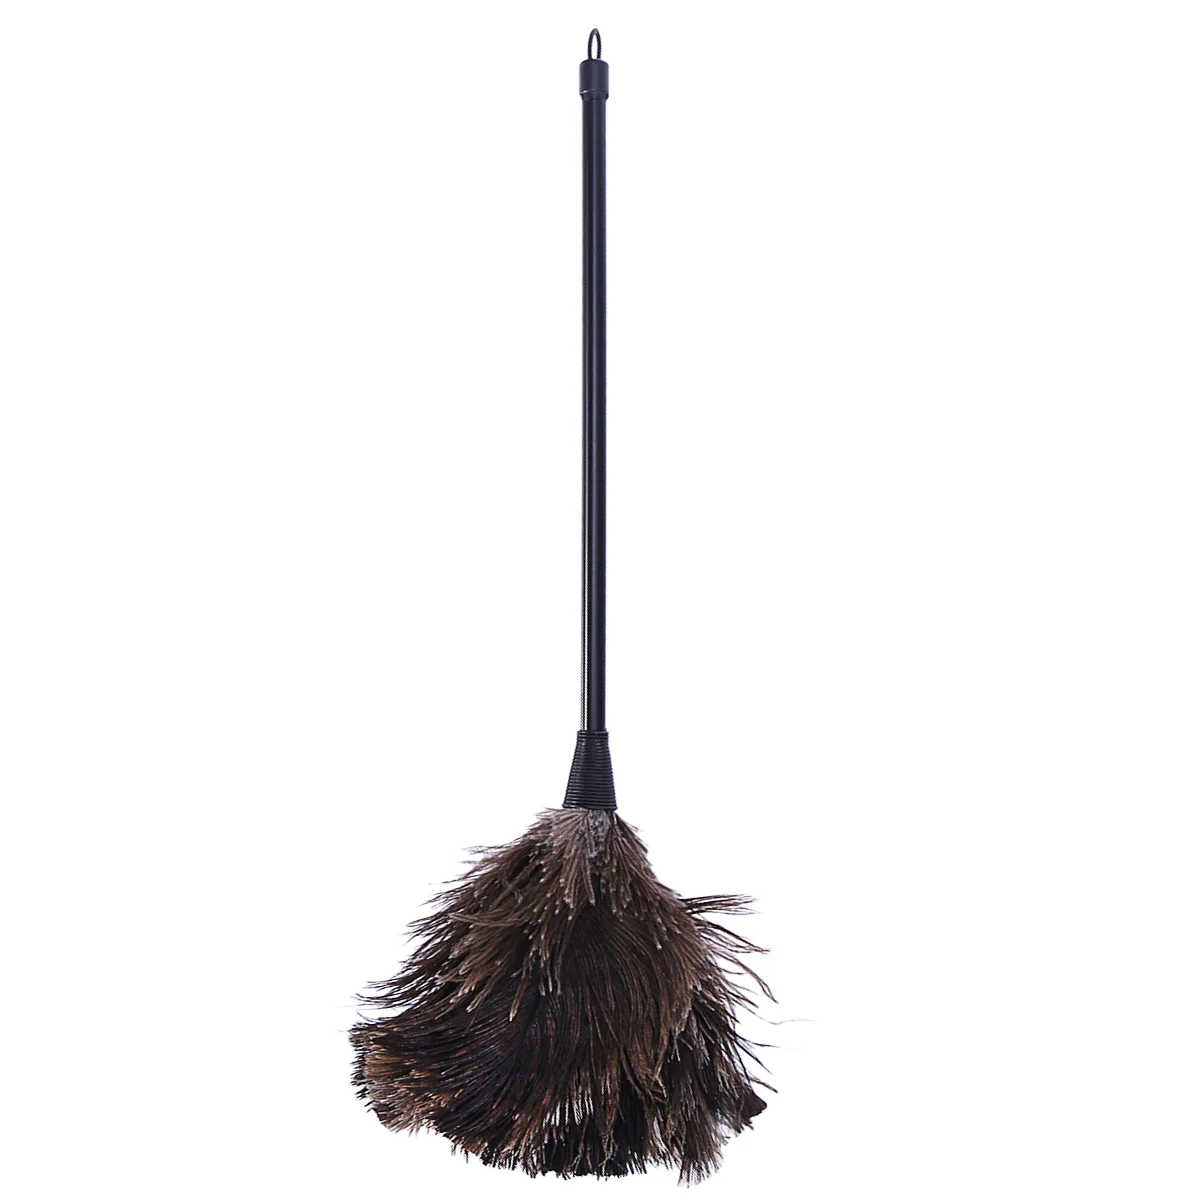 

Duster Cleaning Dusters Ostrich Handled Tool Handle Reusable Brush Maid Ceiling Fans Mini Home Refills Real Swifter Retractable